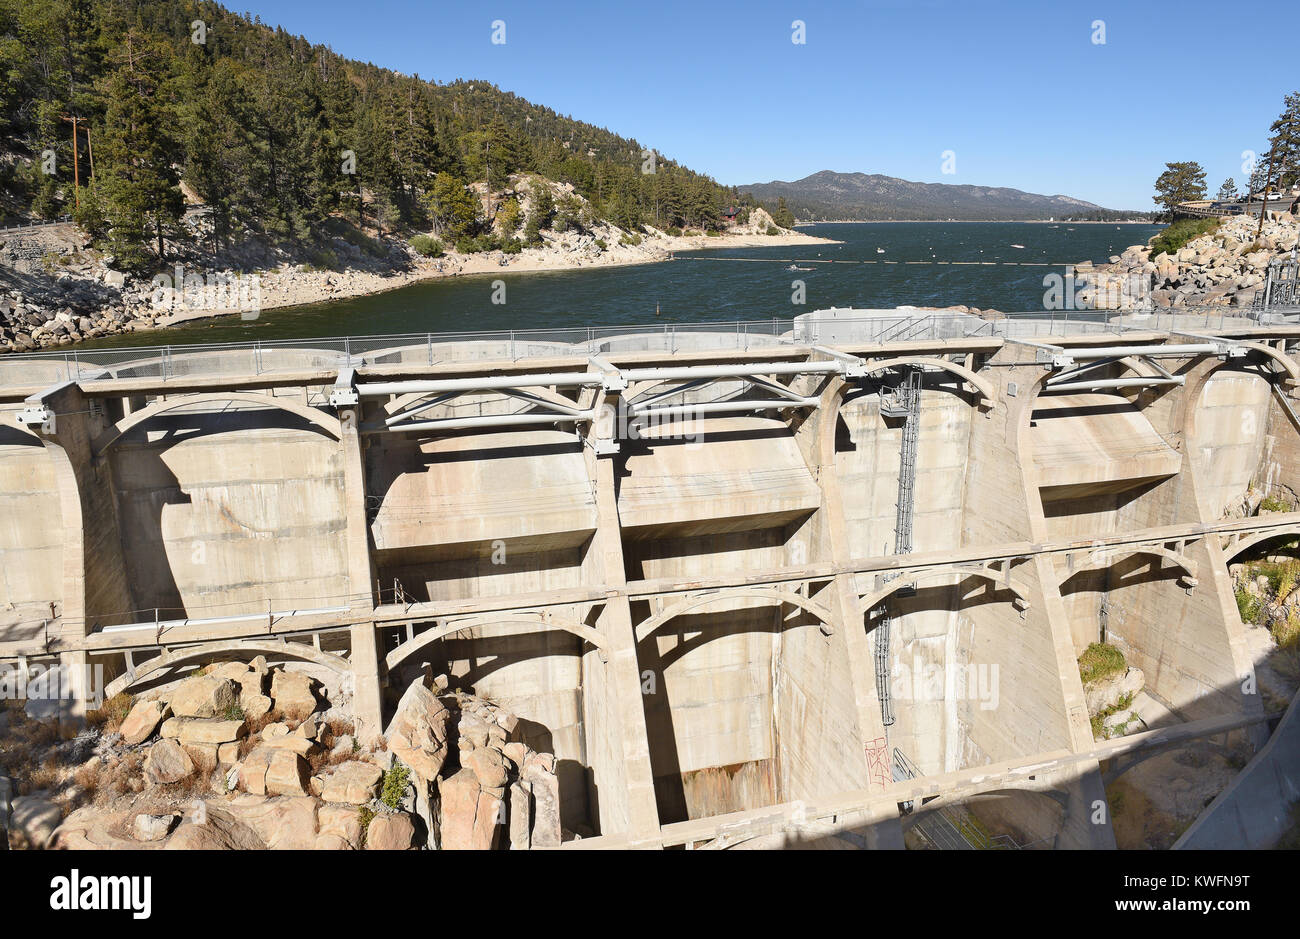 BIG BEAR, CALIFORNIA - SEPTEMBER 25, 2016: Bear Valley Dam. The dam built in 1912 created Big Bear Lake, a recreation area and importat water source f Stock Photo